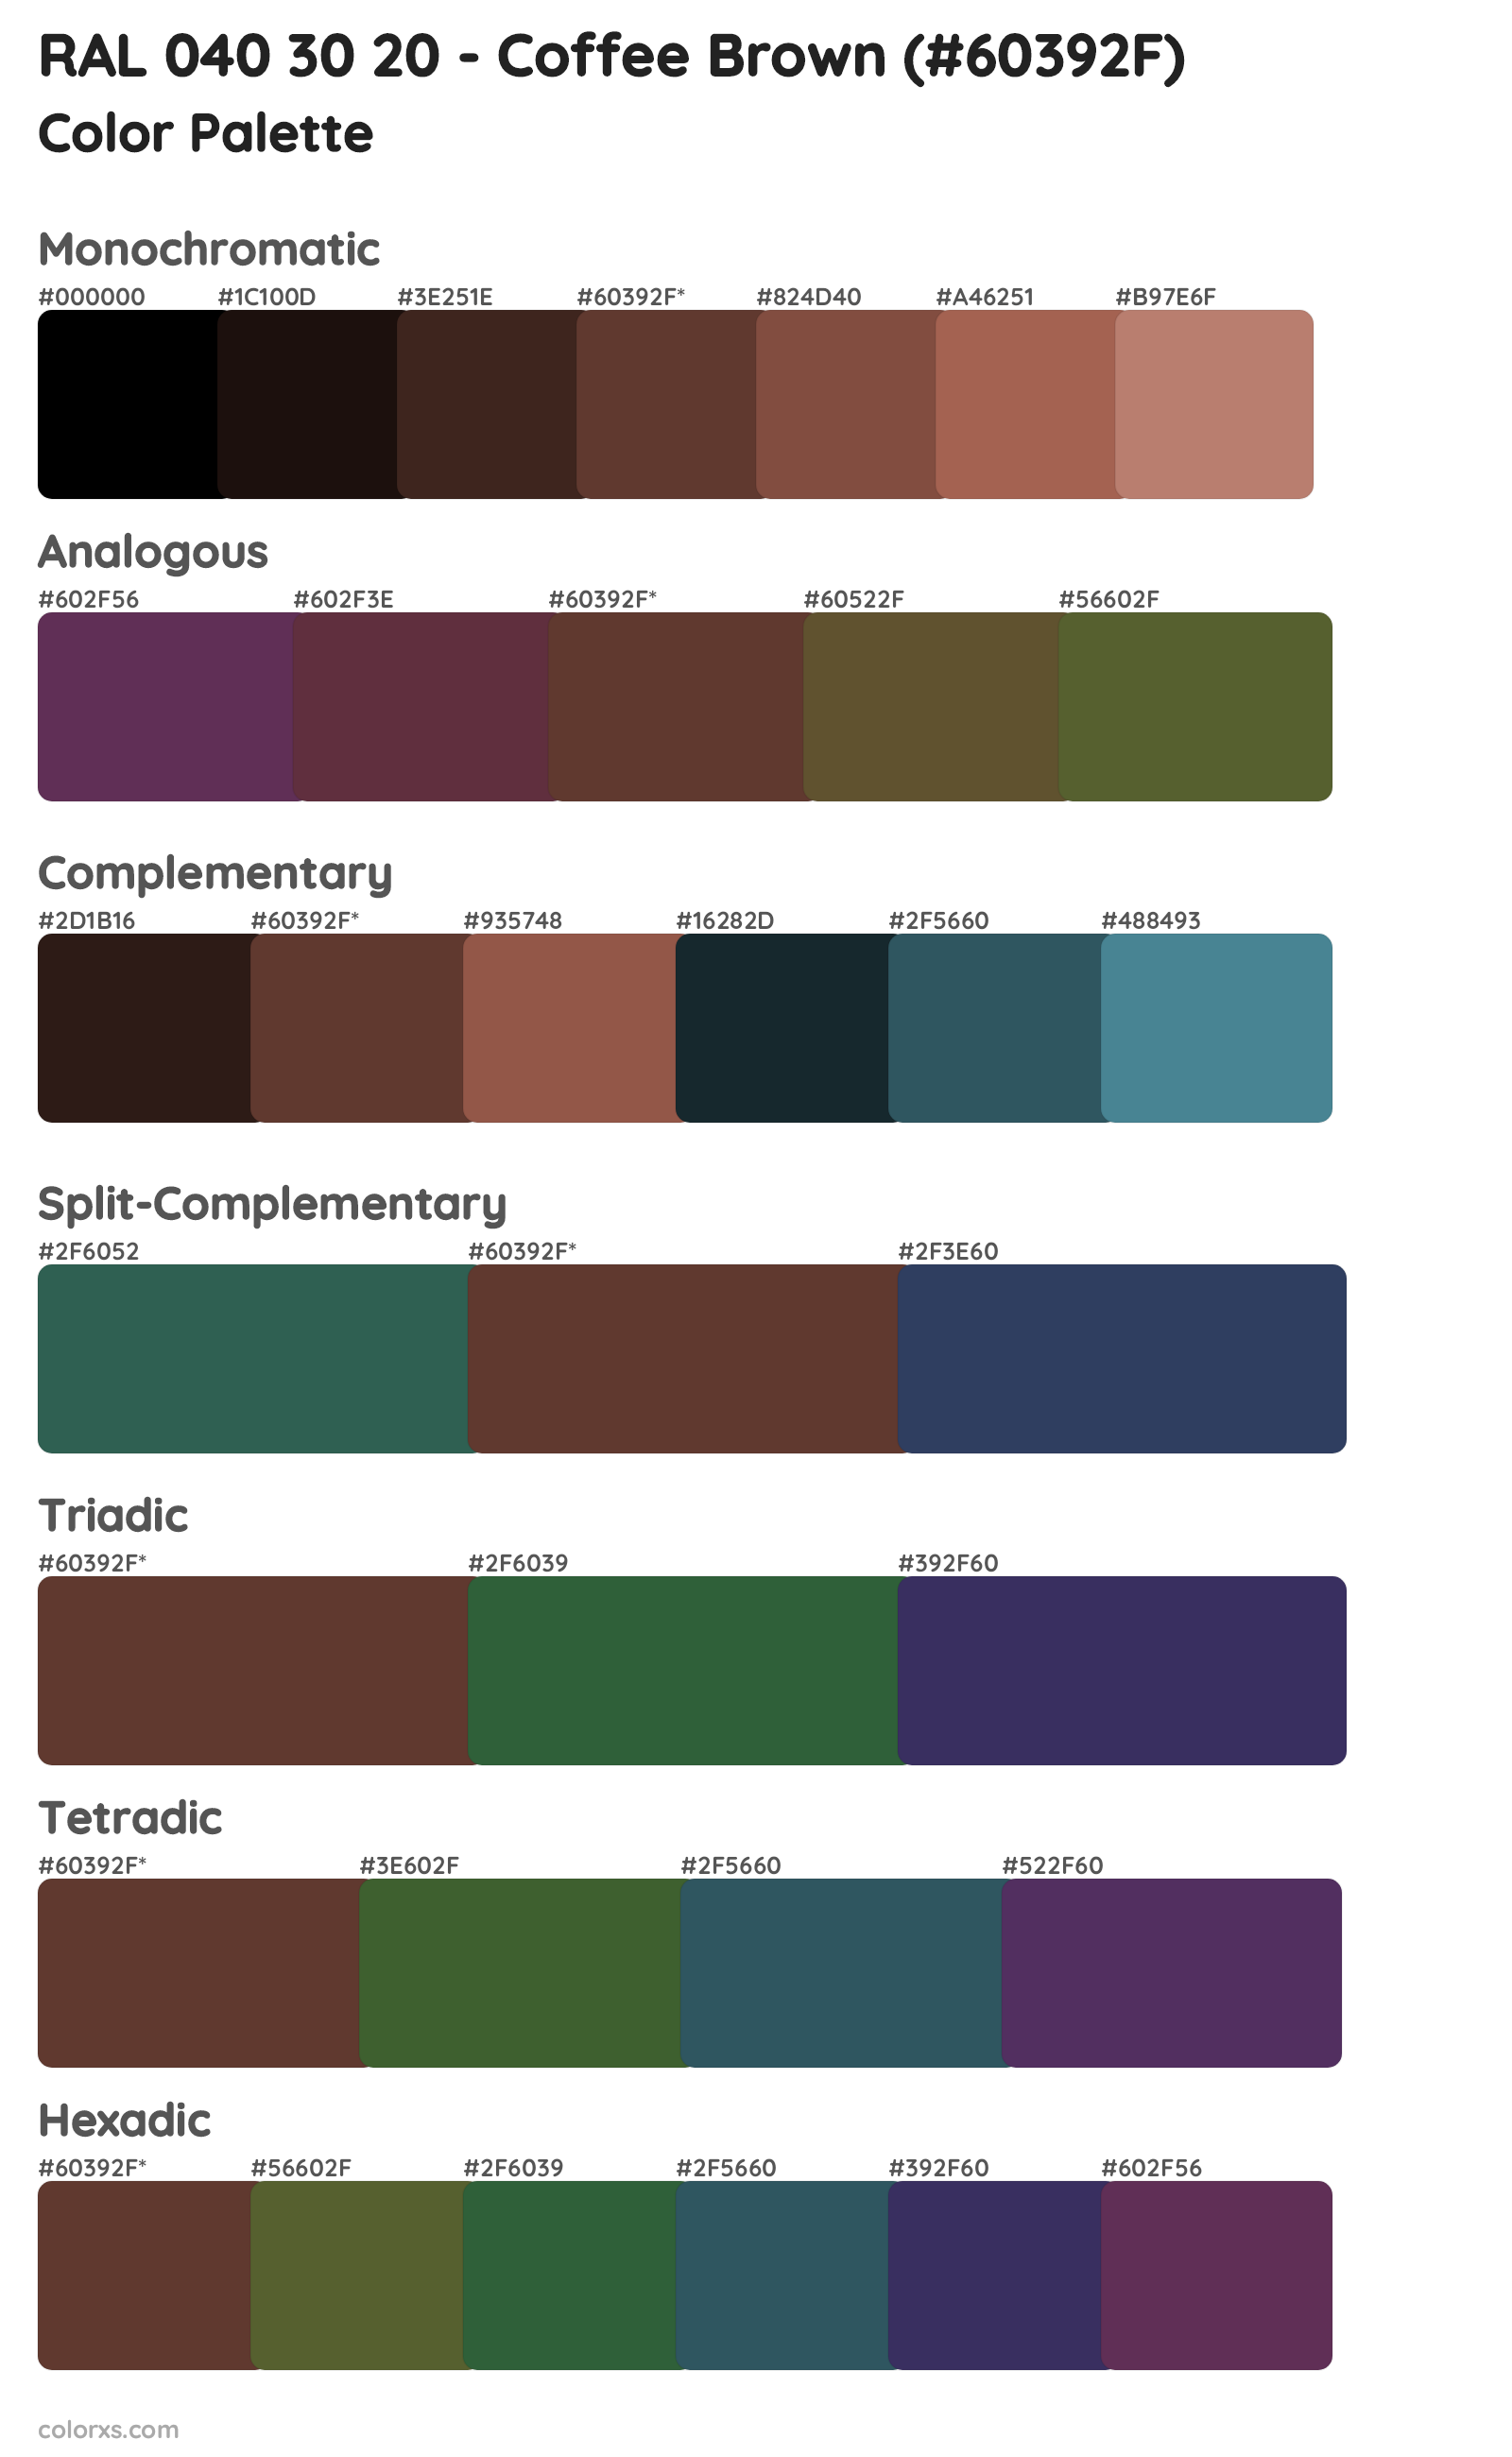 RAL 040 30 20 - Coffee Brown Color Scheme Palettes